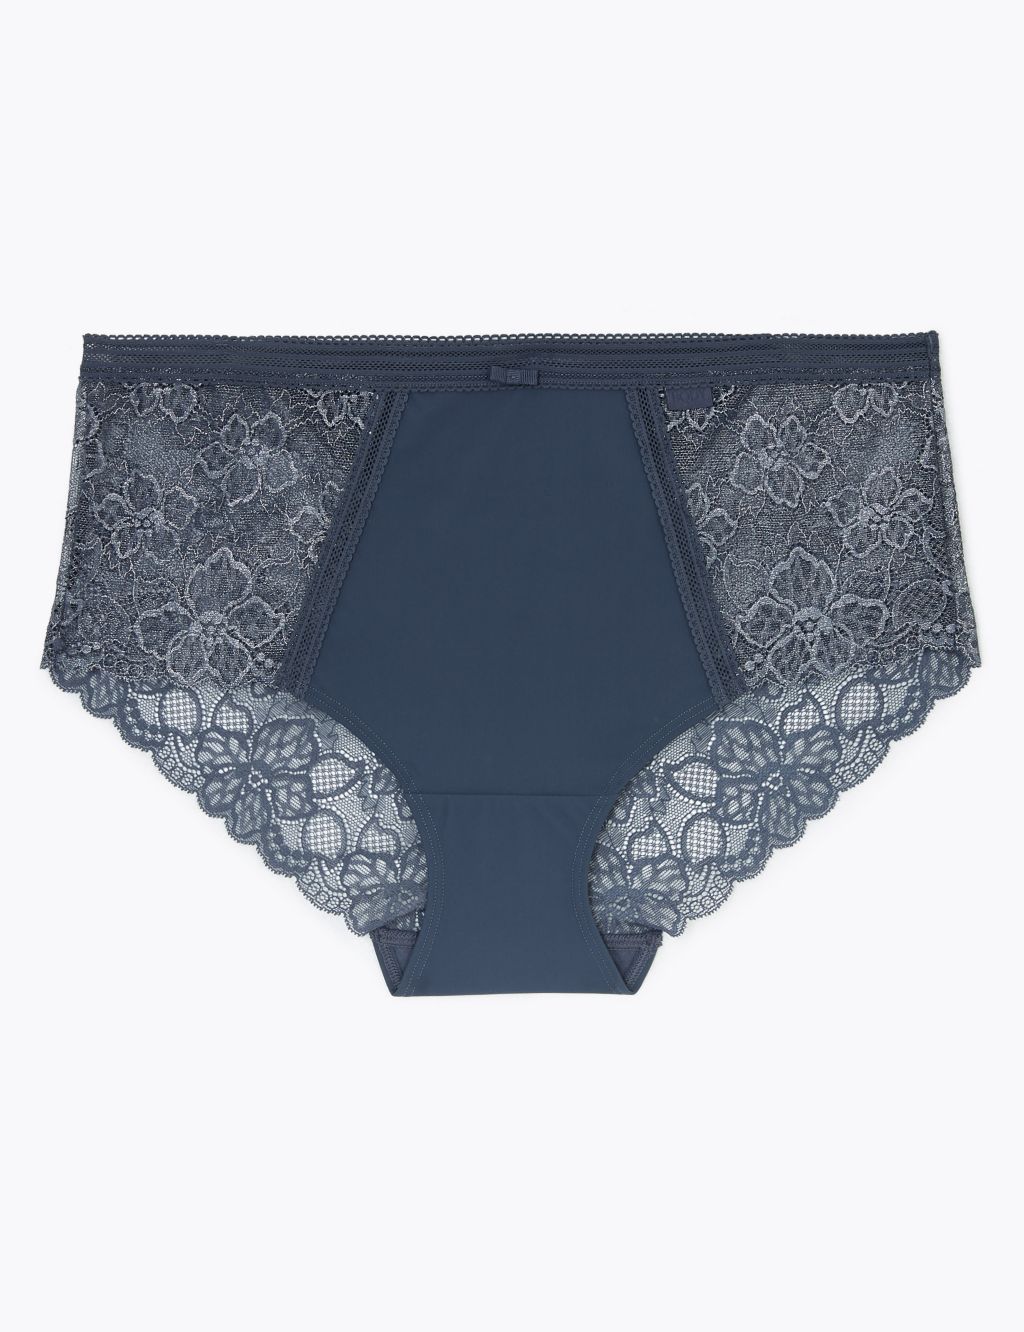 M&S Grey Blue Pink Floral All Lace Midi Knickers (UK12)